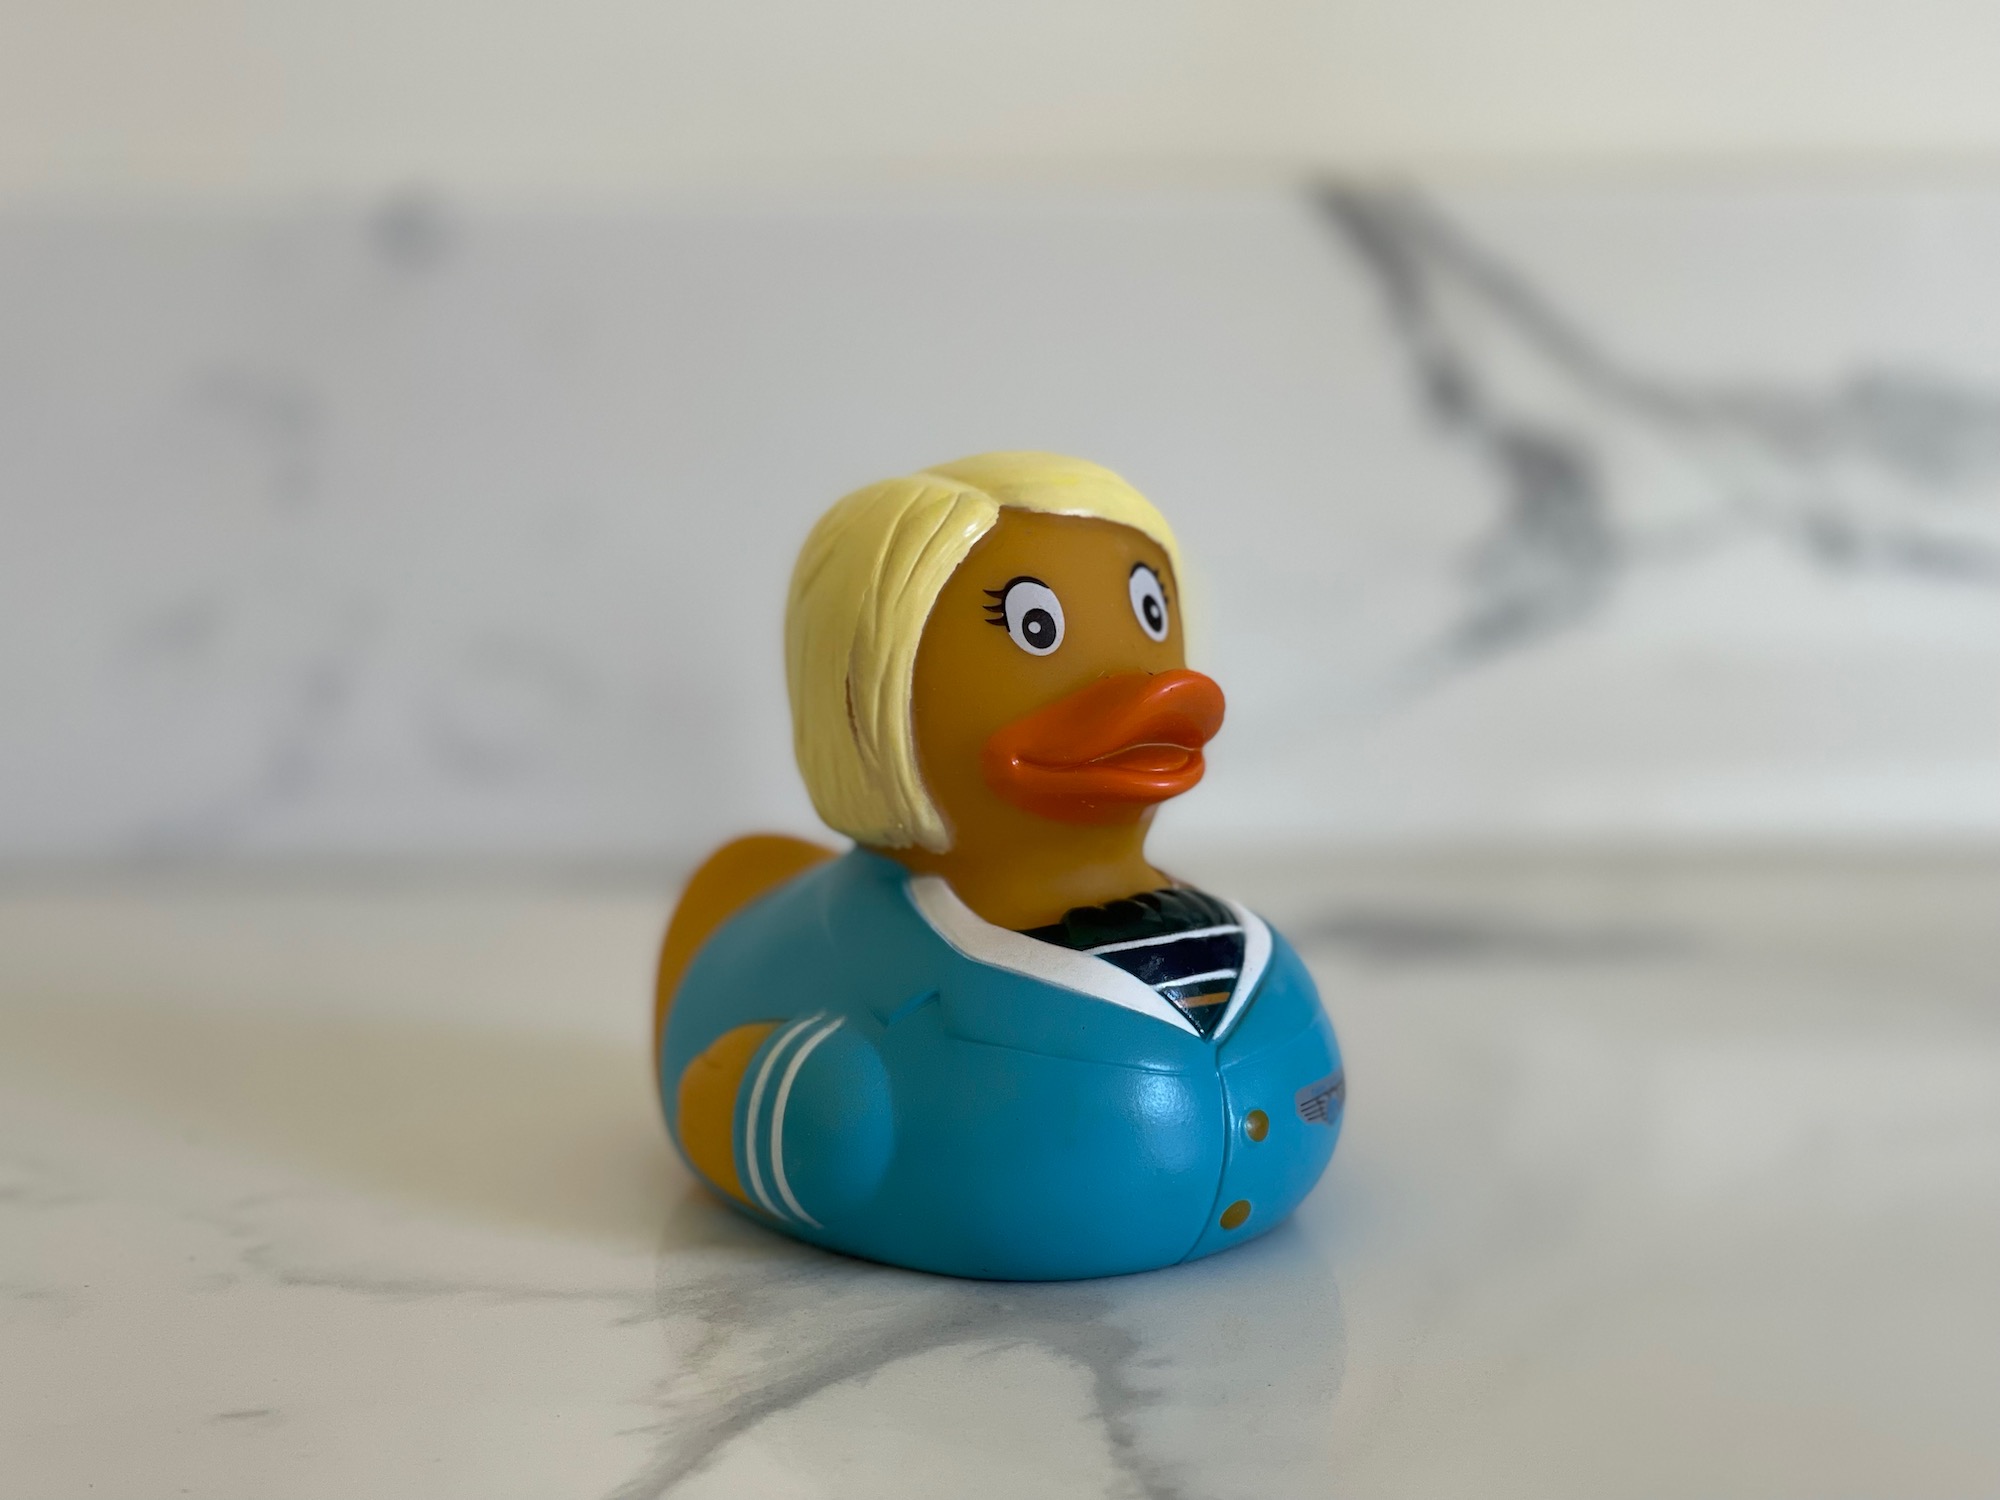 a yellow rubber duck with blonde hair